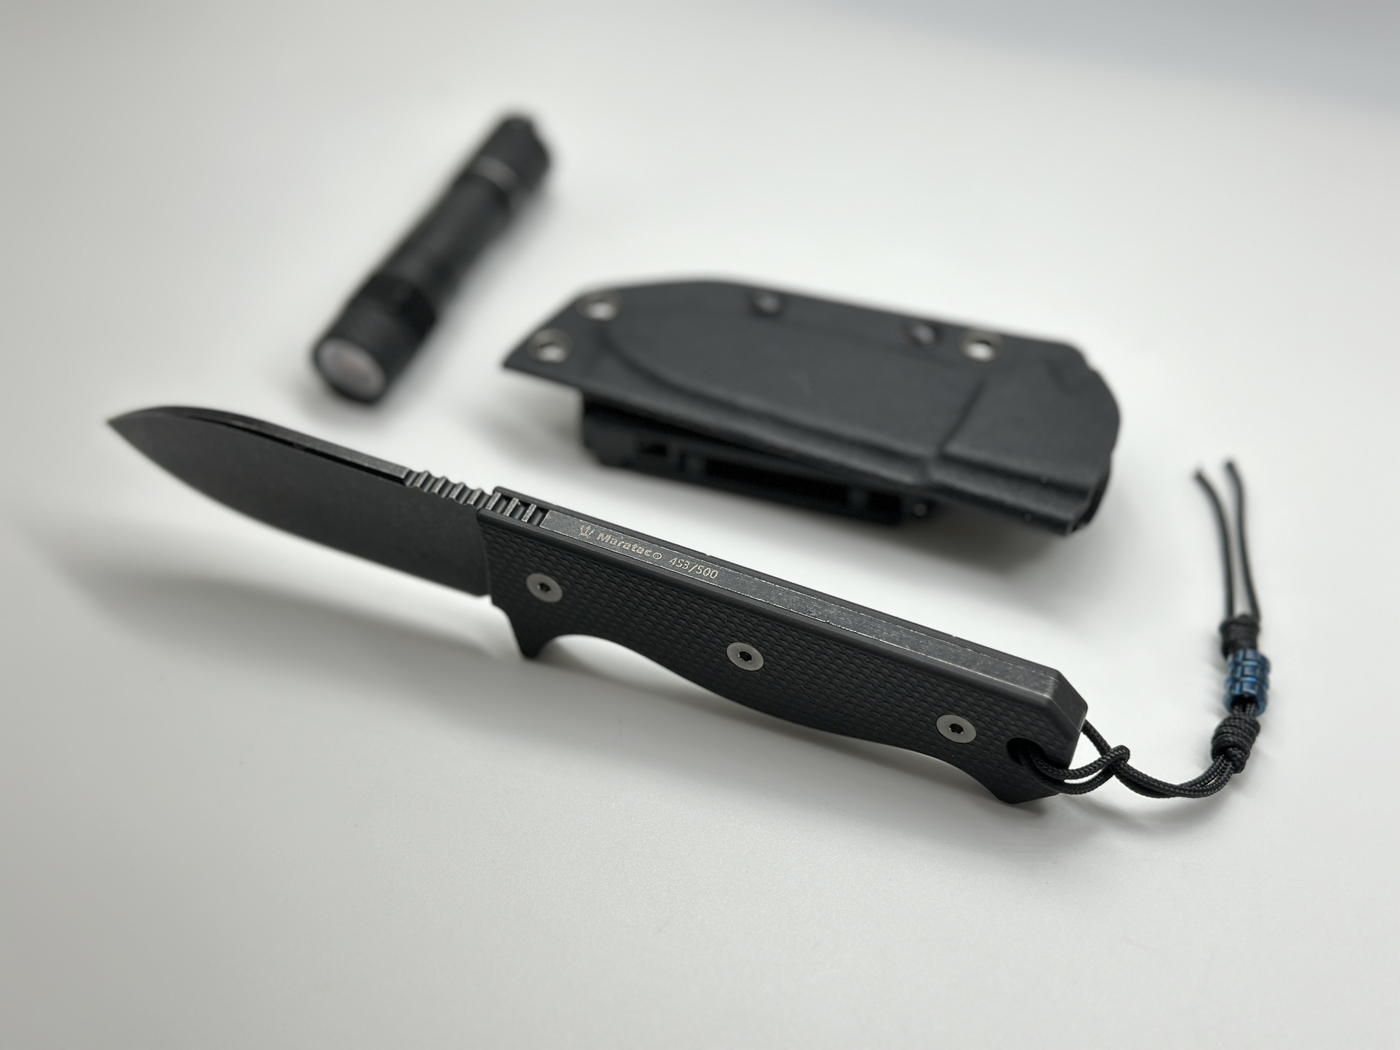 R4A - Ready 4 Action Knife / D2 Fixed Blade ( G10 Black Scales )